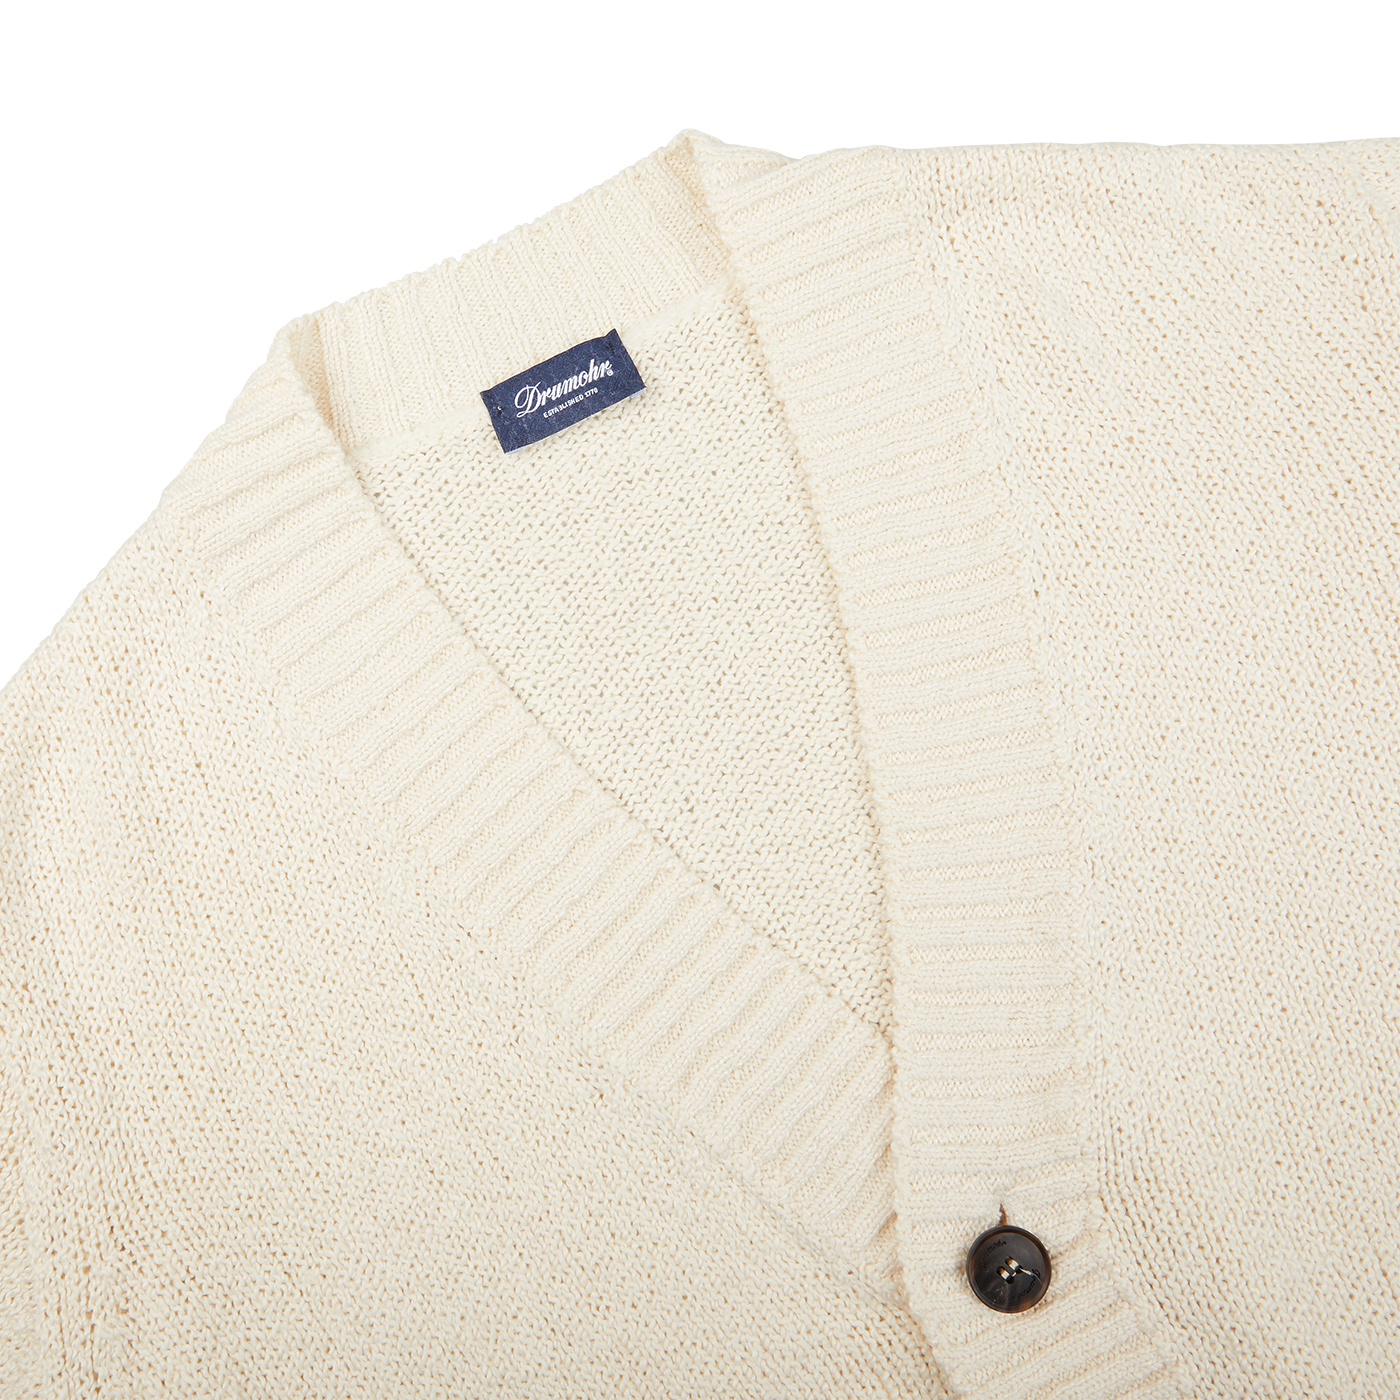 A luxurious Ecru White Knitted Cotton Cardigan sweater with buttons on the front by Drumohr.